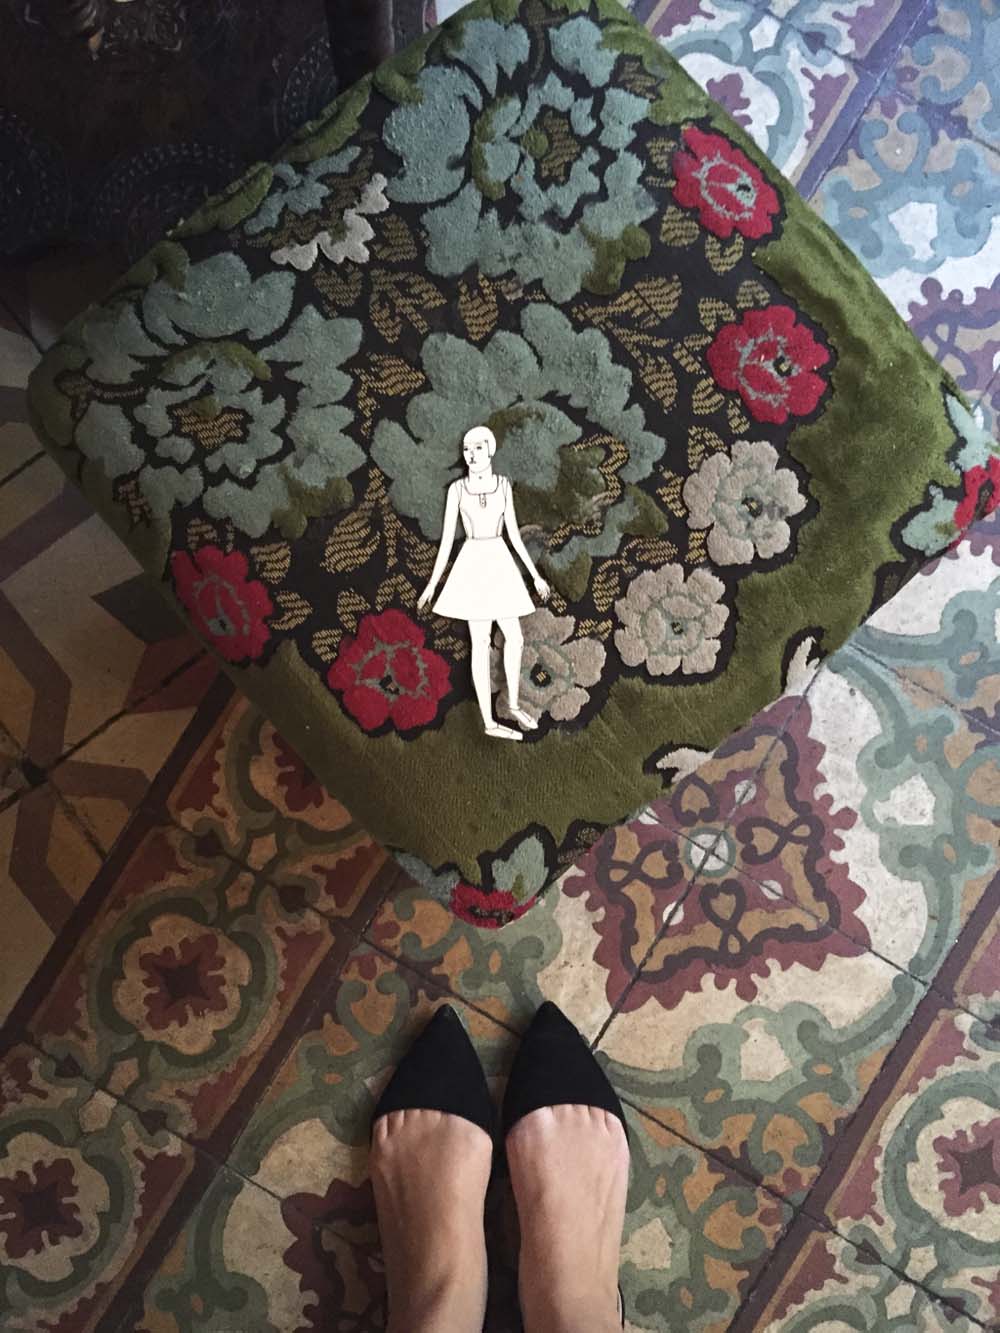 eve is in love with the floral motifs on the furniture and floor tiles